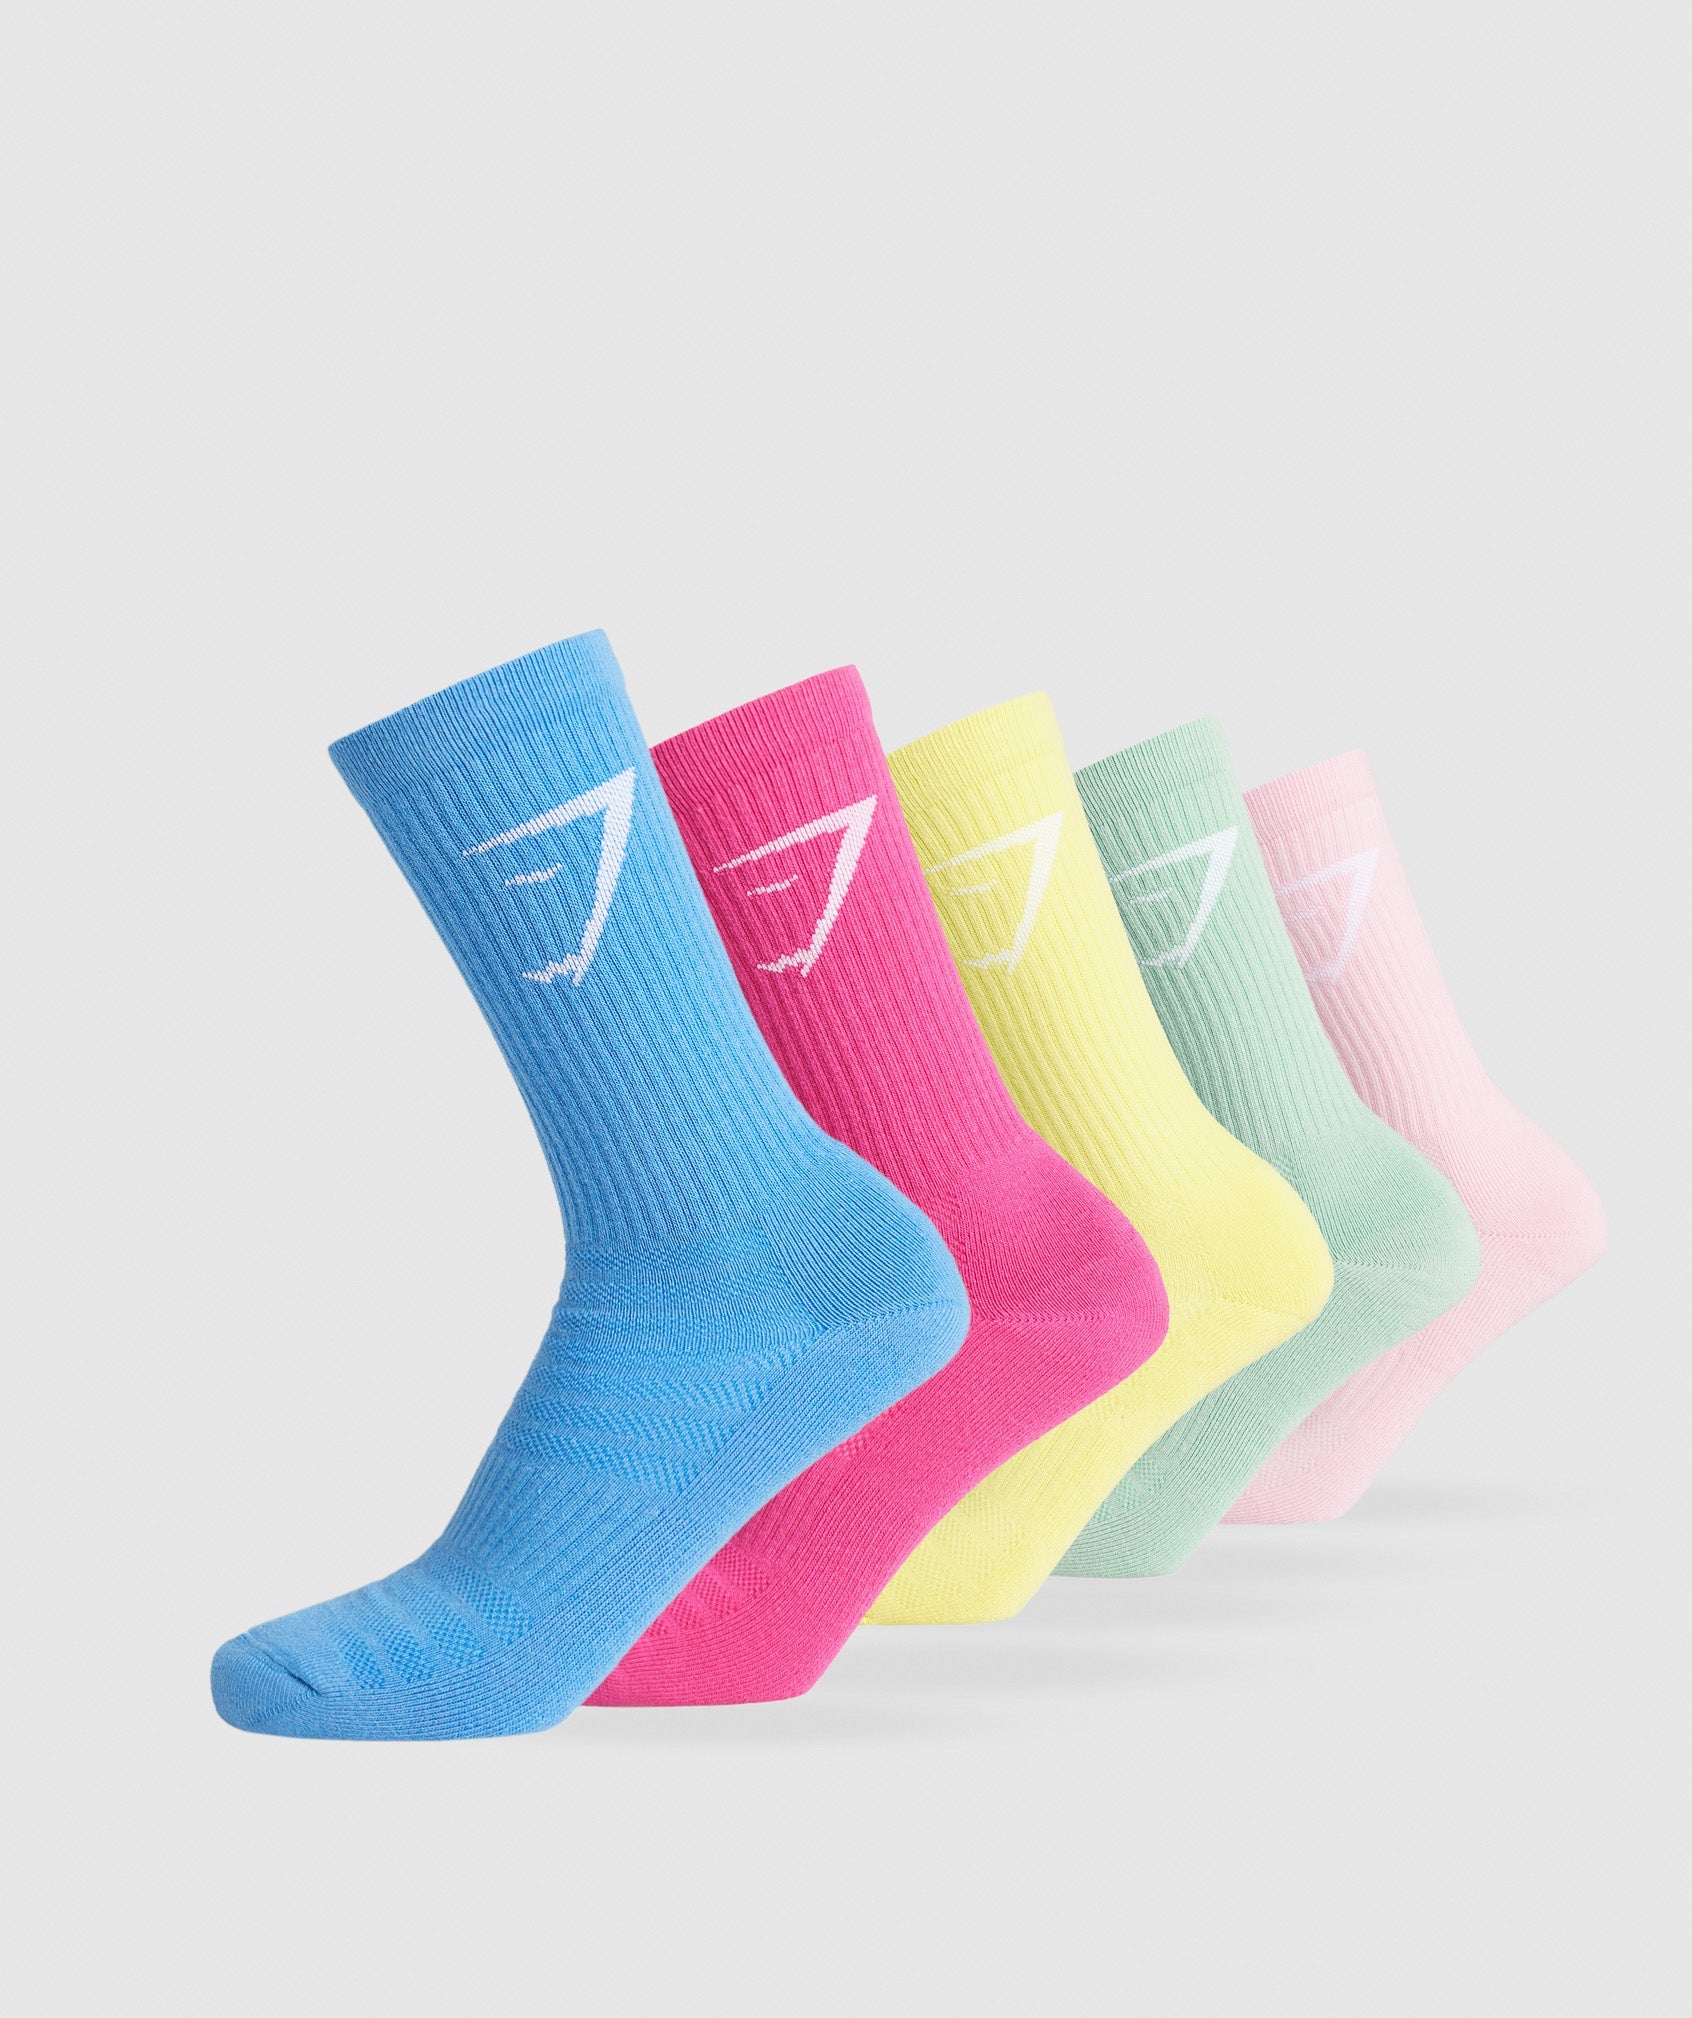 Crew Socks 5pk in Pink/Yellow/Green/Pink/Blue is out of stock